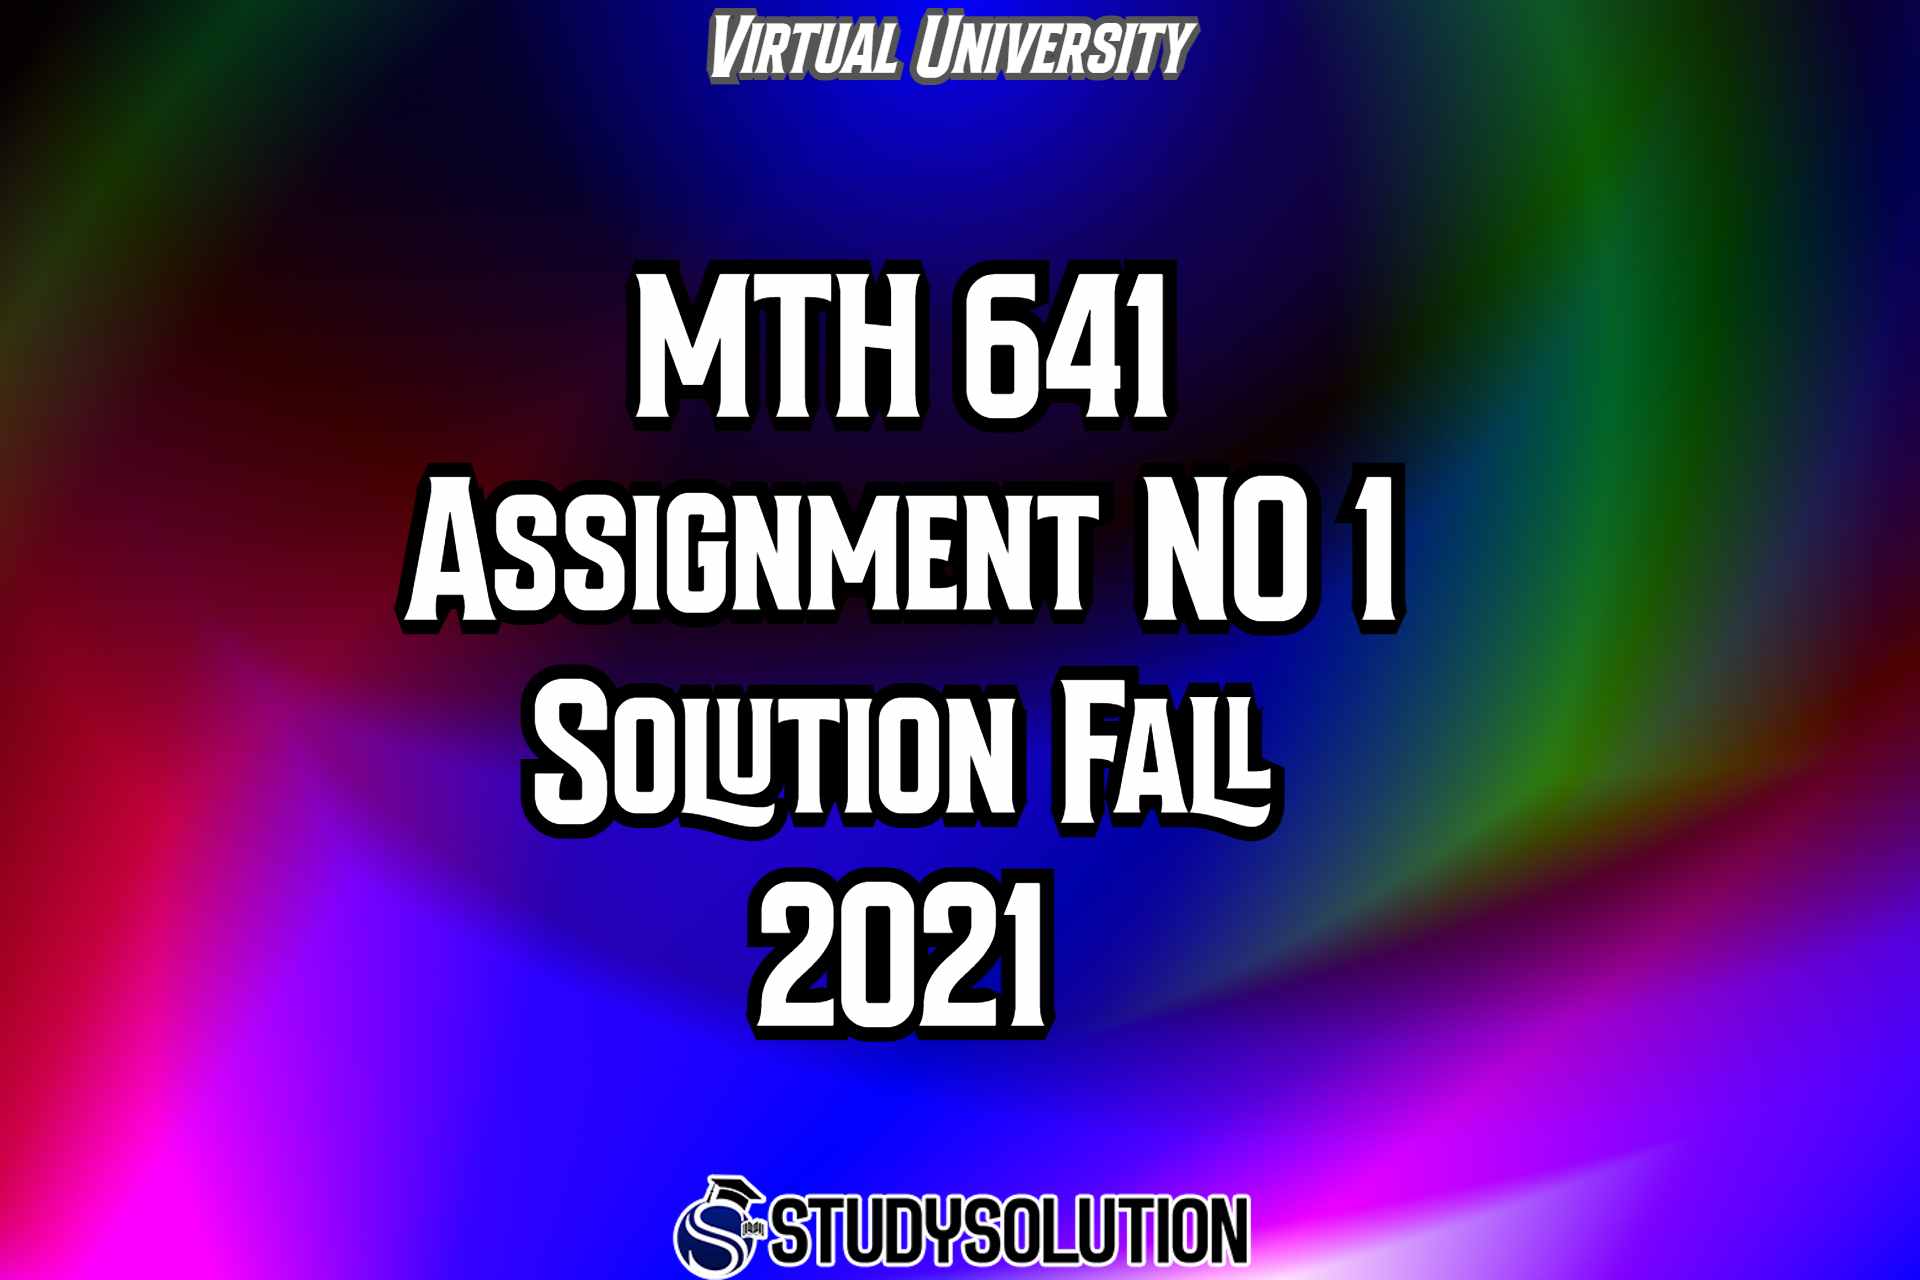 MTH641 Assignment NO 1 Solution Fall 2021